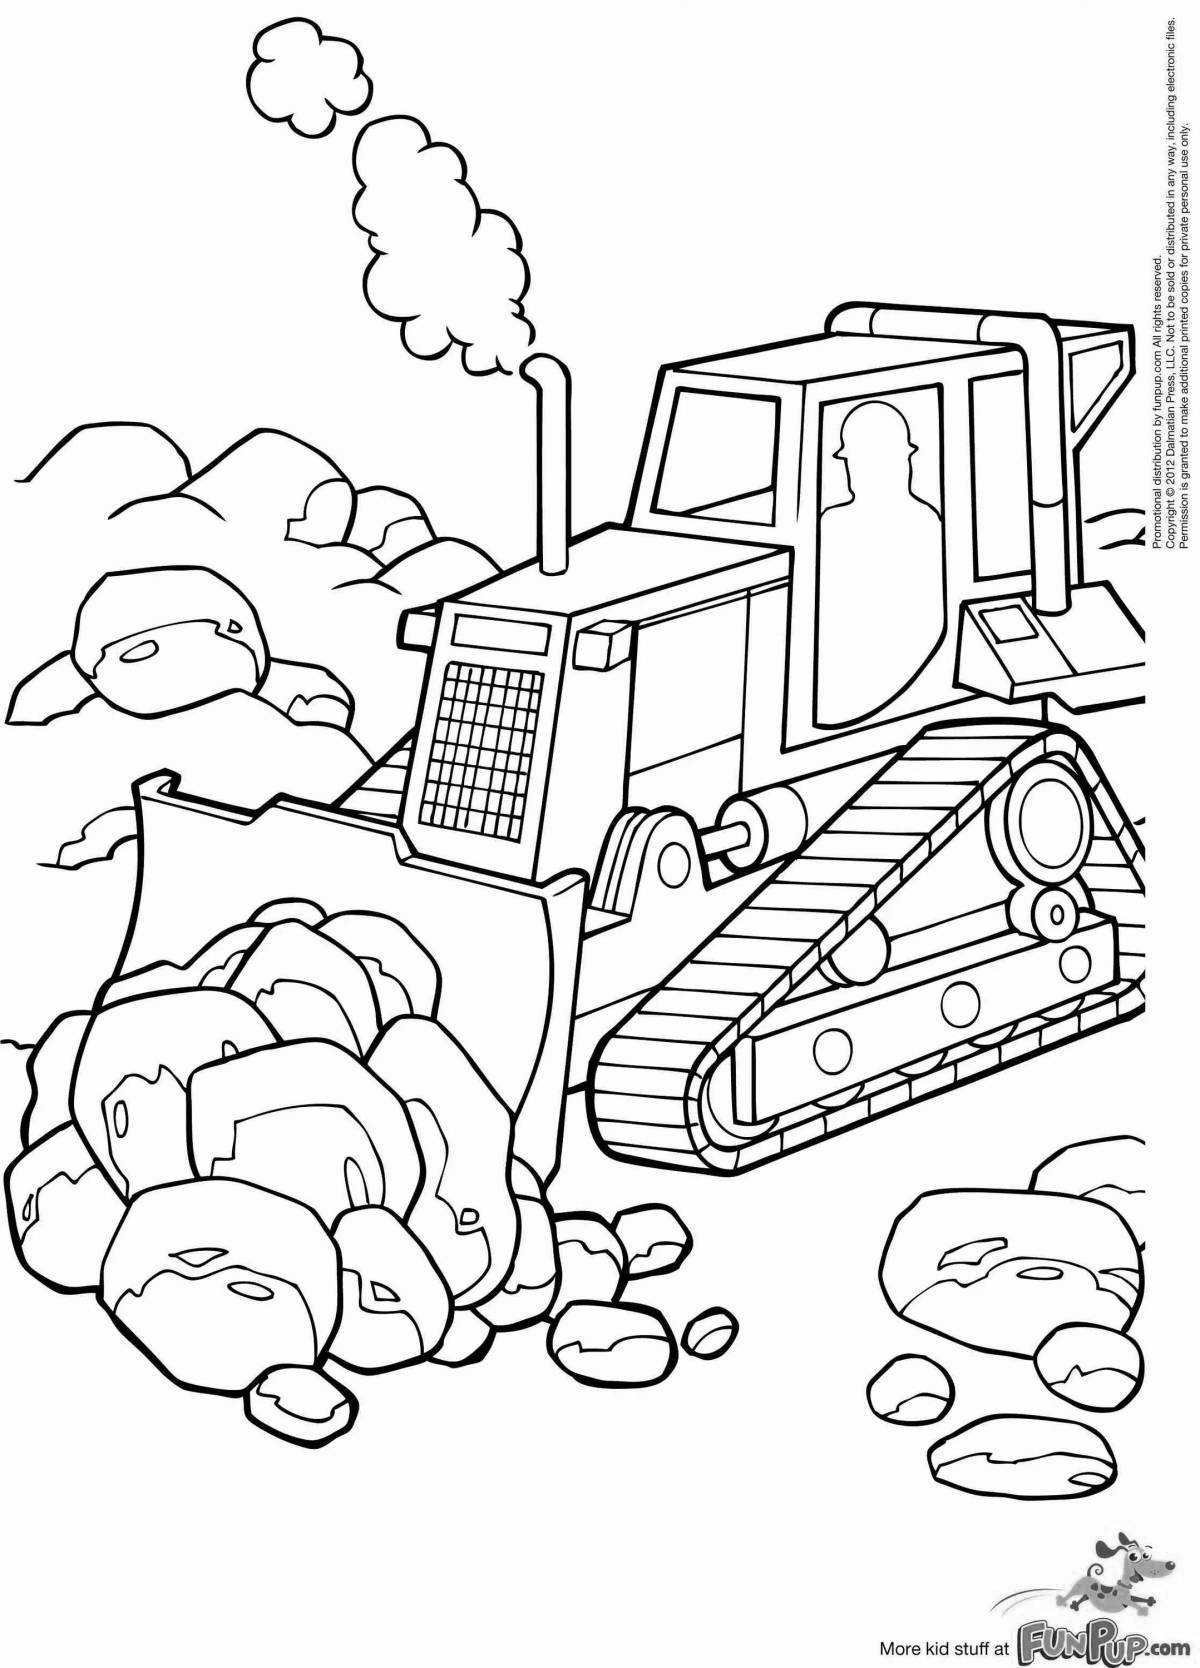 Coloring page for a spectacular snowplow